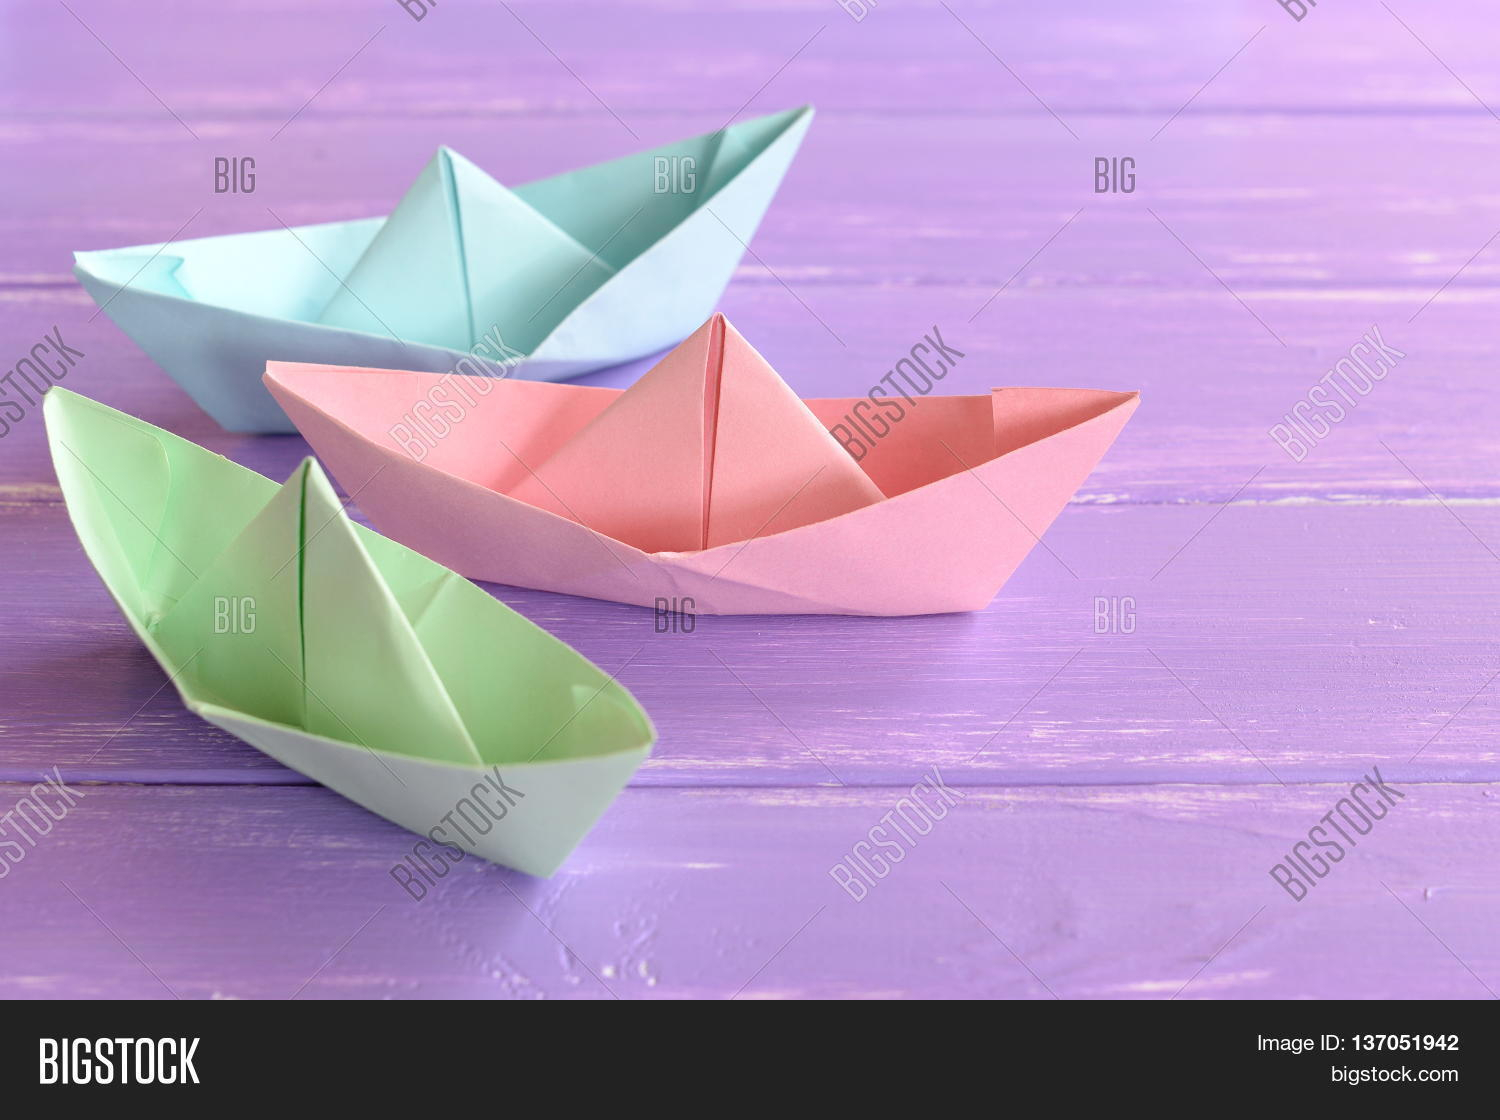 How To Make Cool Origami Toys Pink Green Blue Image Photo Free Trial Bigstock